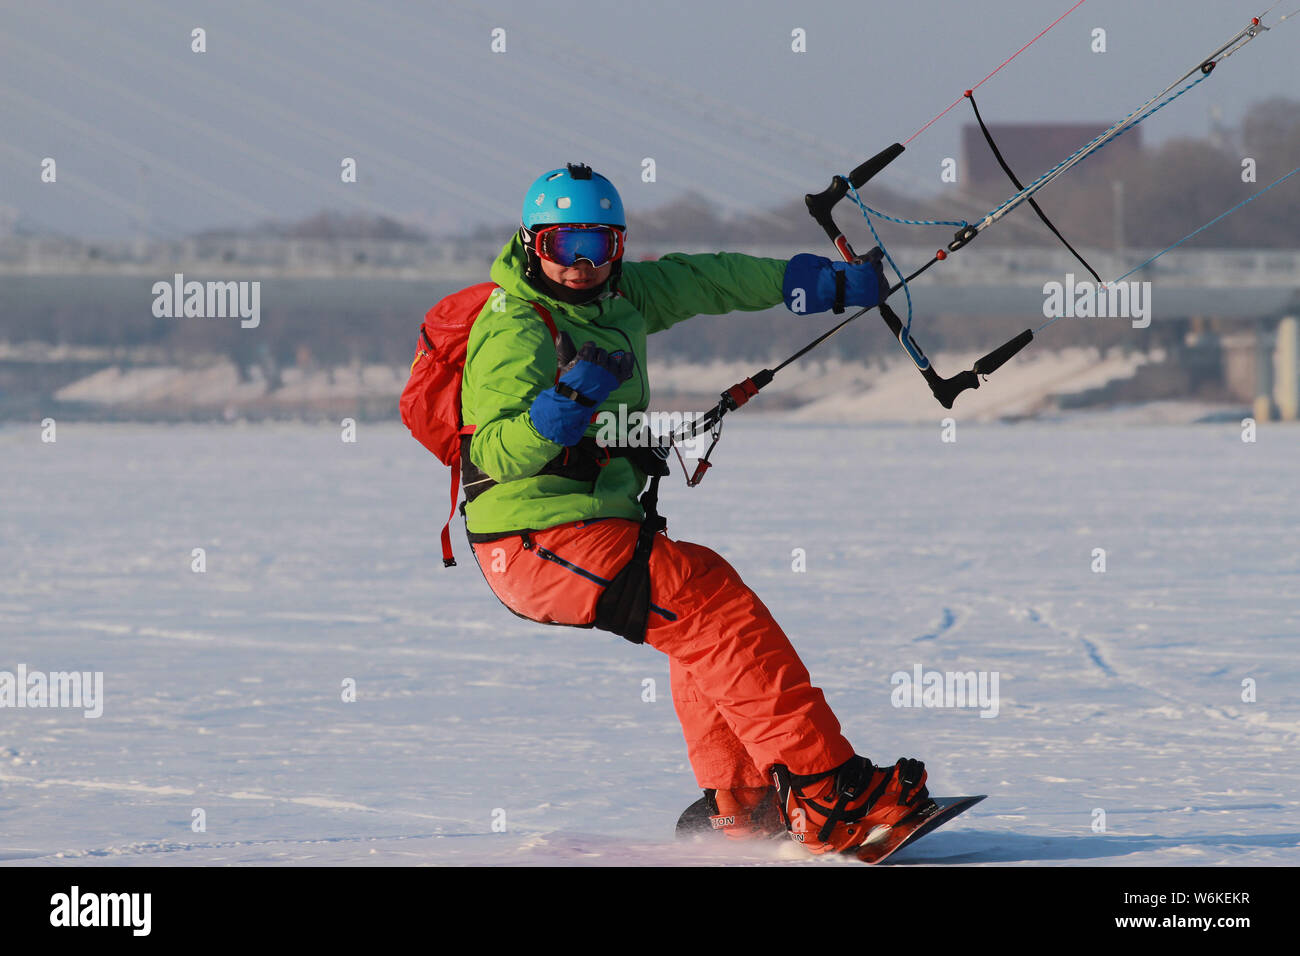 A snowkiter uses a large kite to glide on snow in Harbin city, northeast China's Heilongjiang province, 4 January 2018.      Snowkiting or Kite skiing Stock Photo